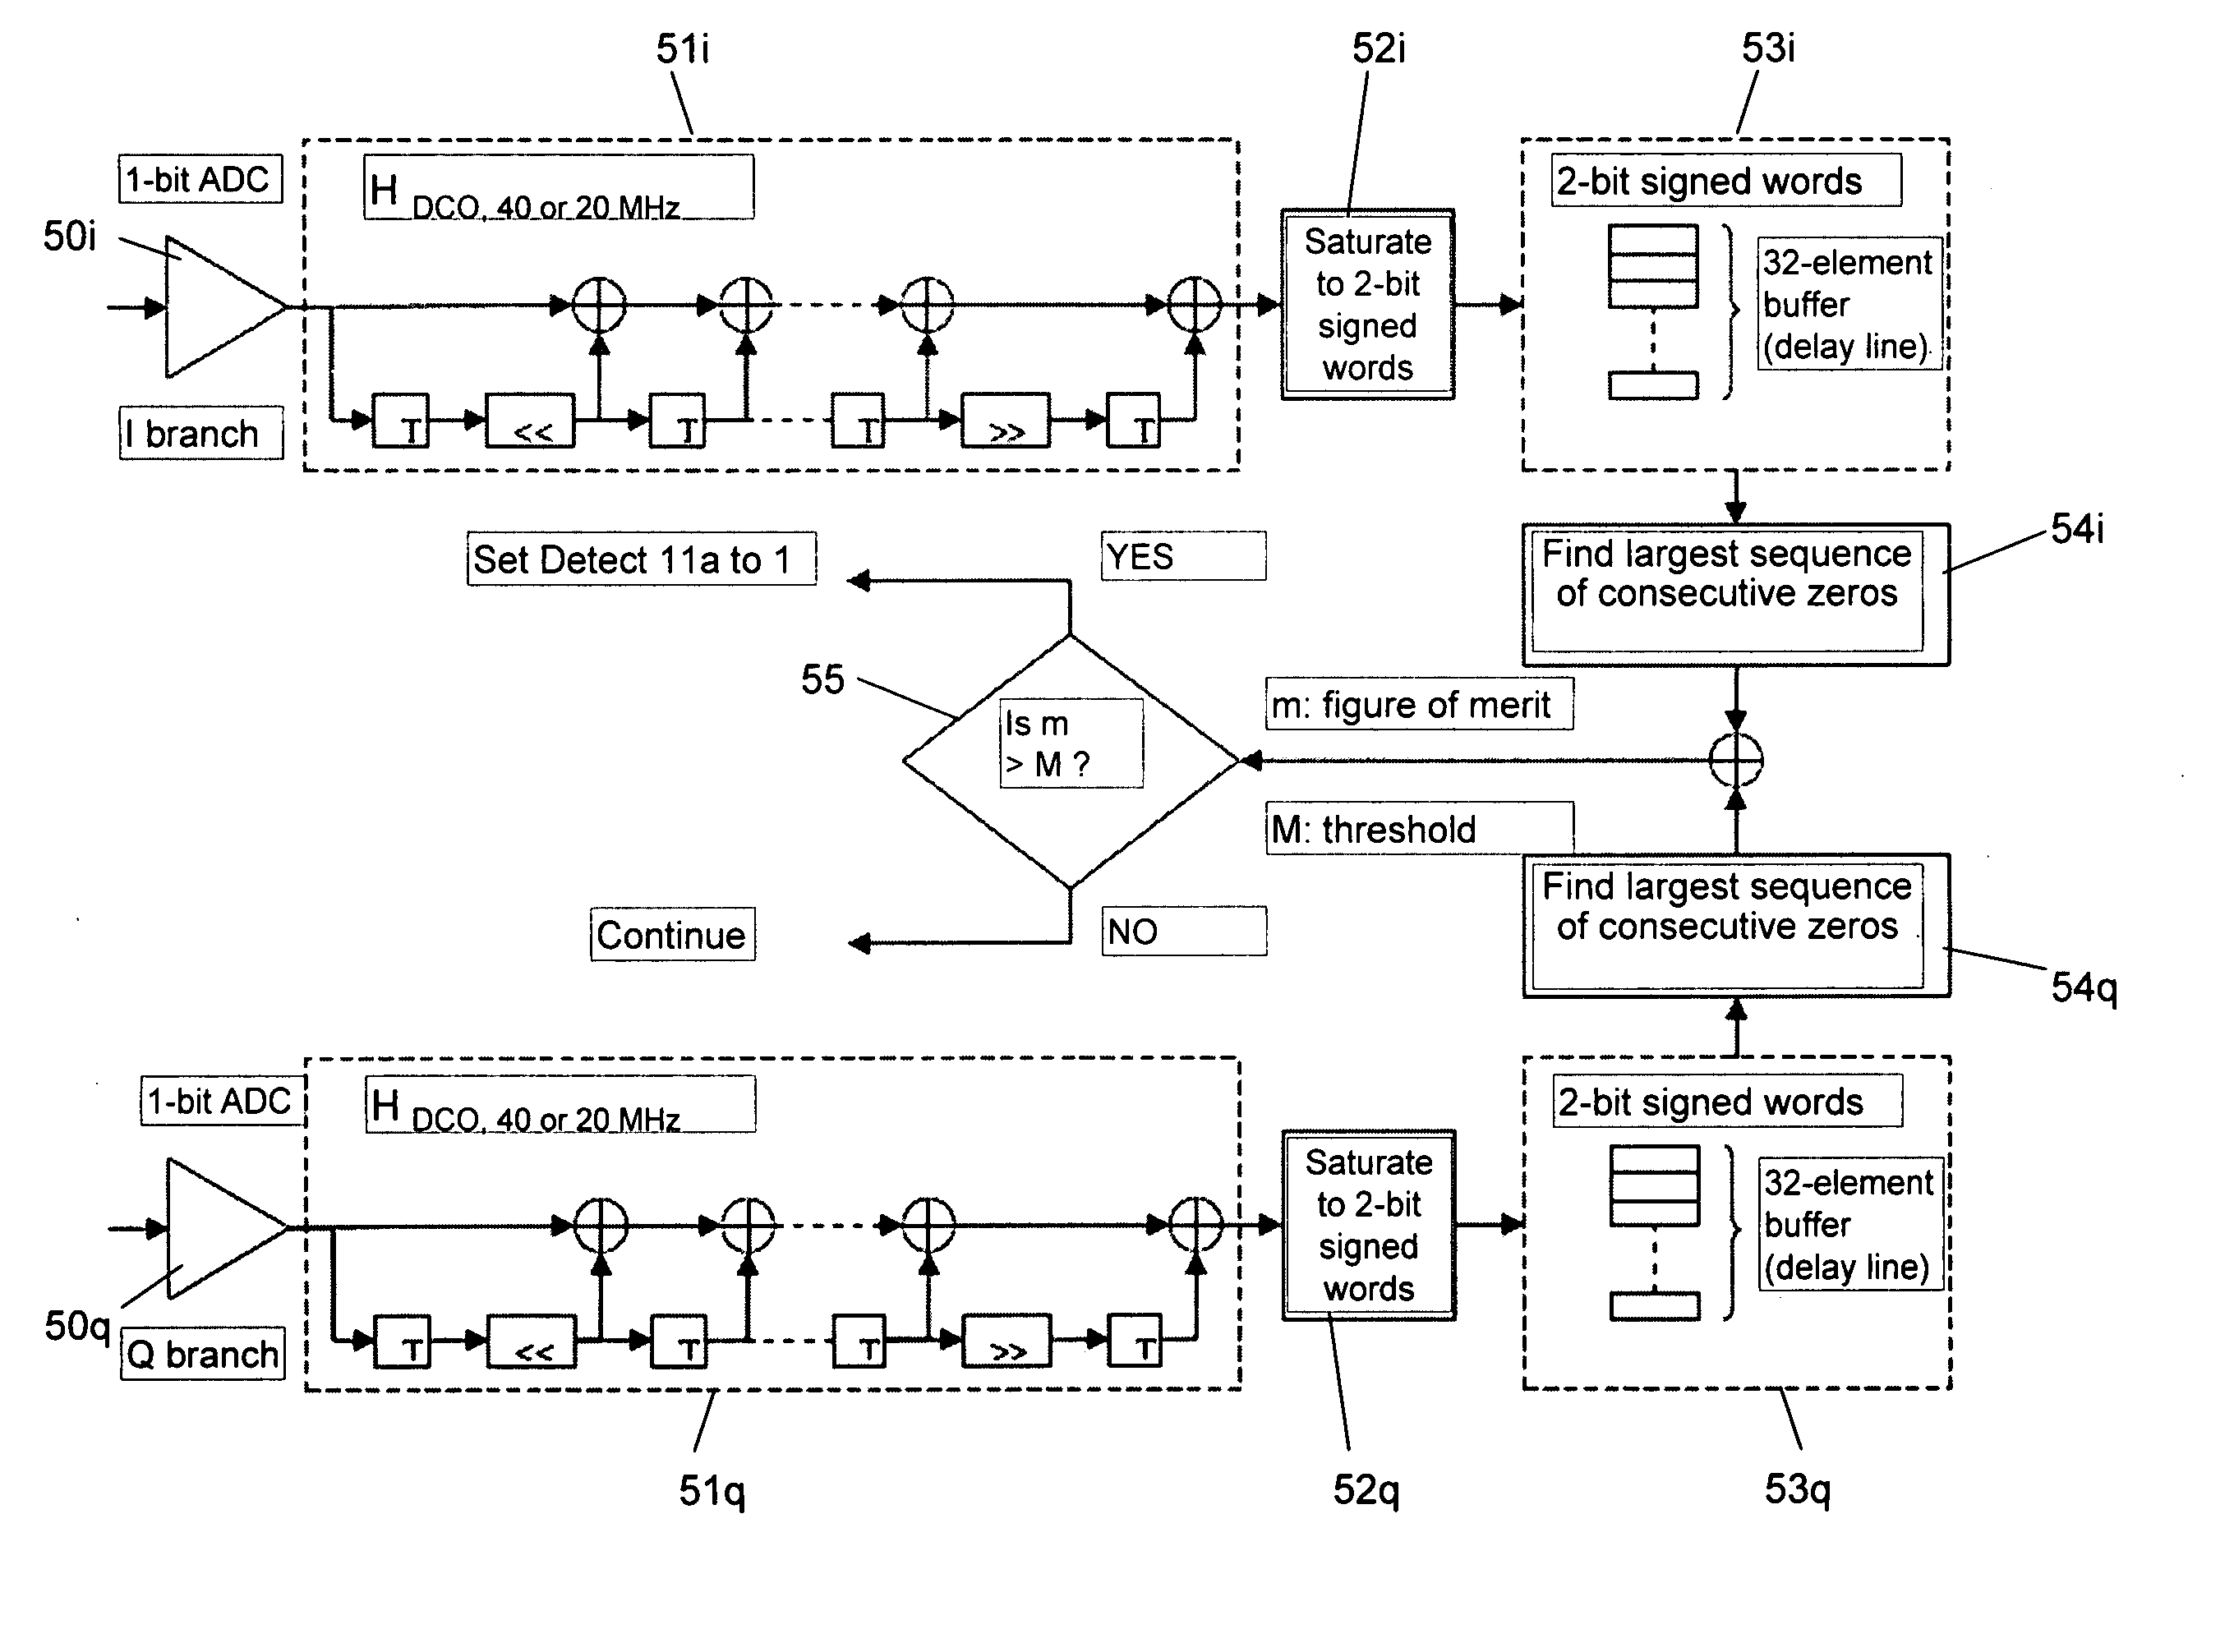 Apparatus and method for detecting preambles according to IEEE 802.11A wireless LAN standard